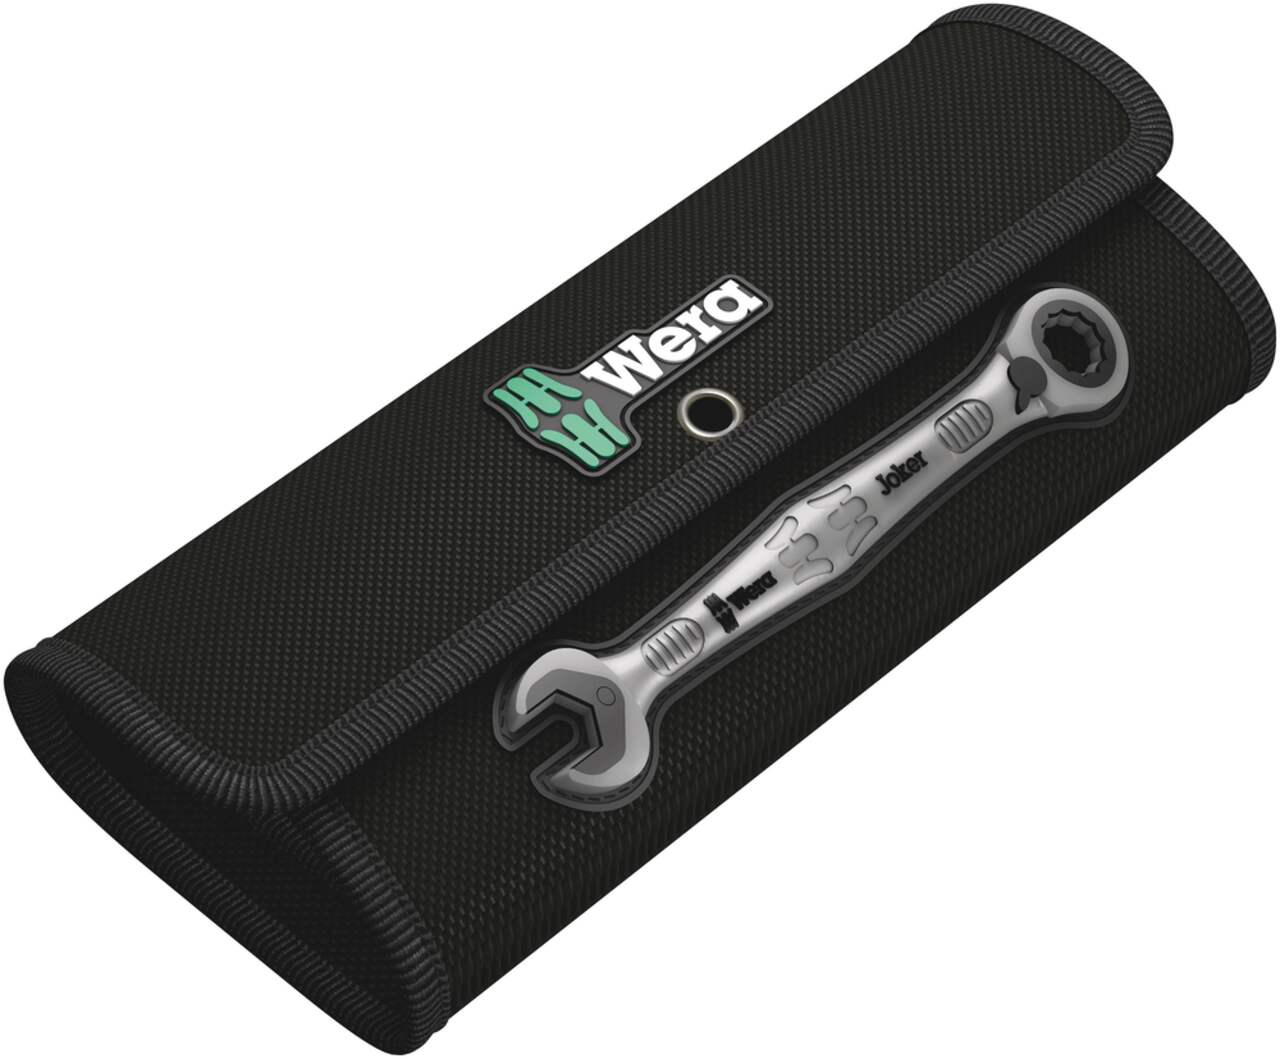 Wera Tools Sale! Joker Spanner Wrench Set New Style Set Of 4